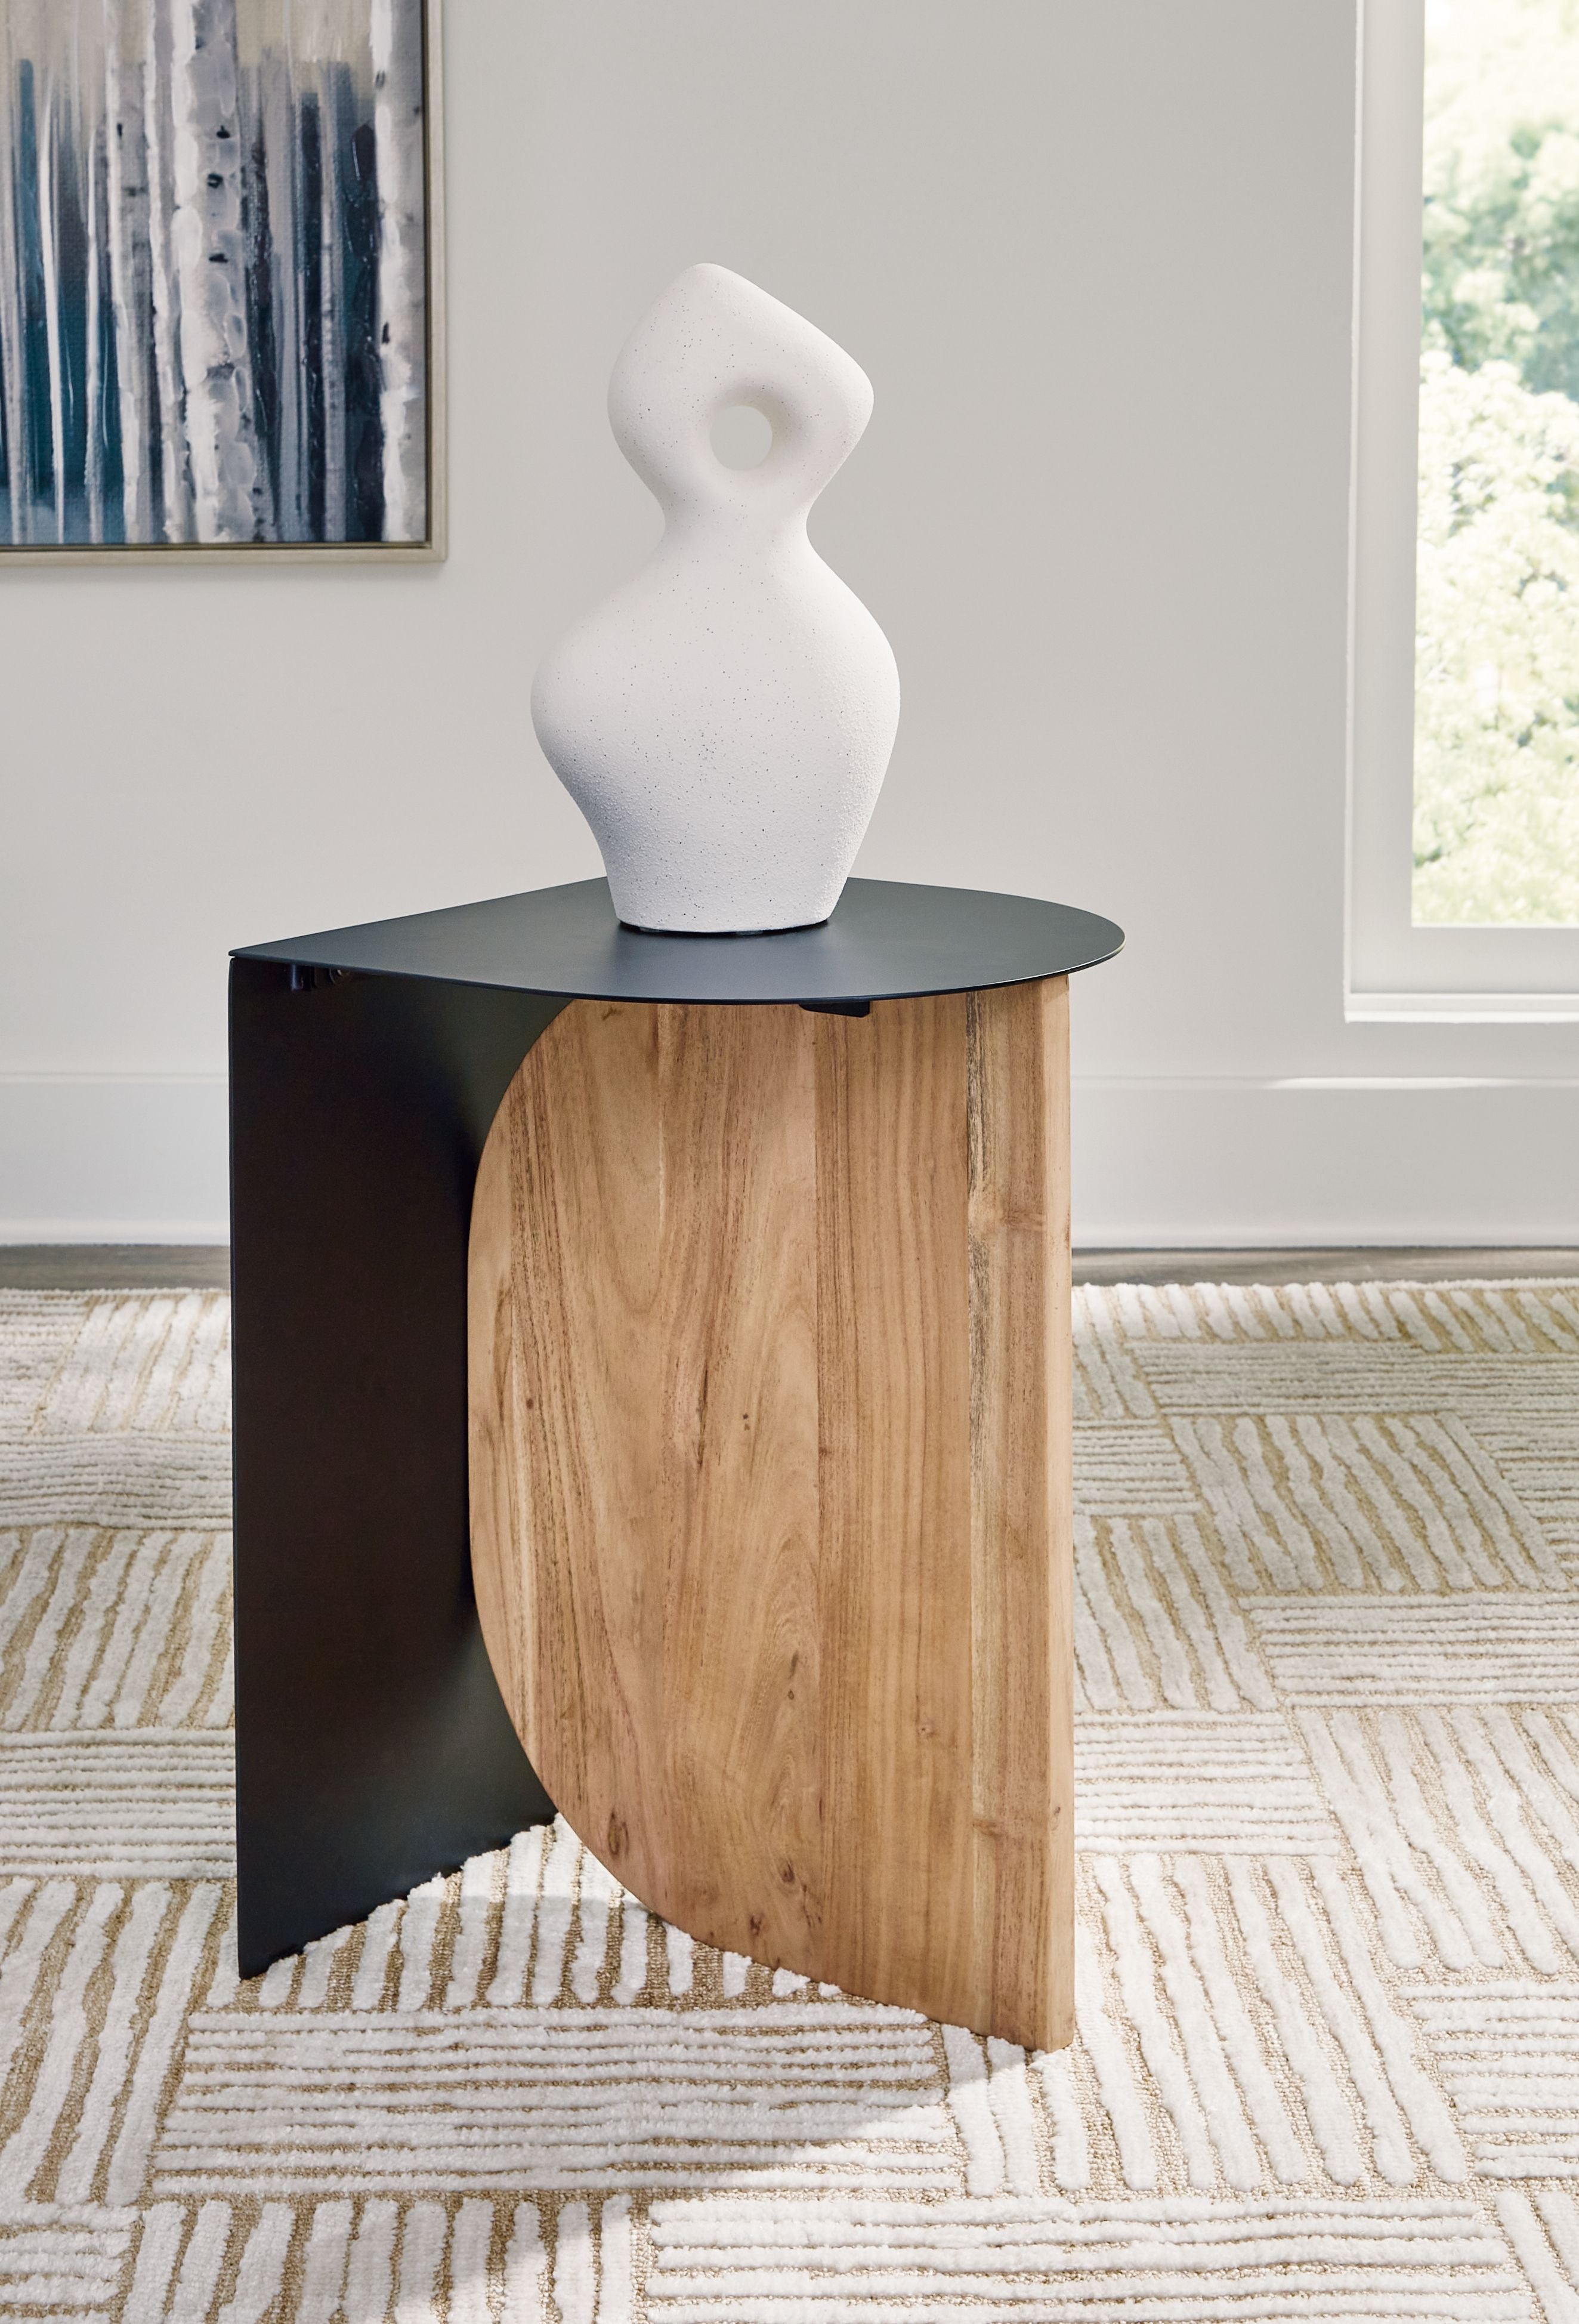 Ladgate - Black / Natural - Accent Table - 5th Avenue Furniture